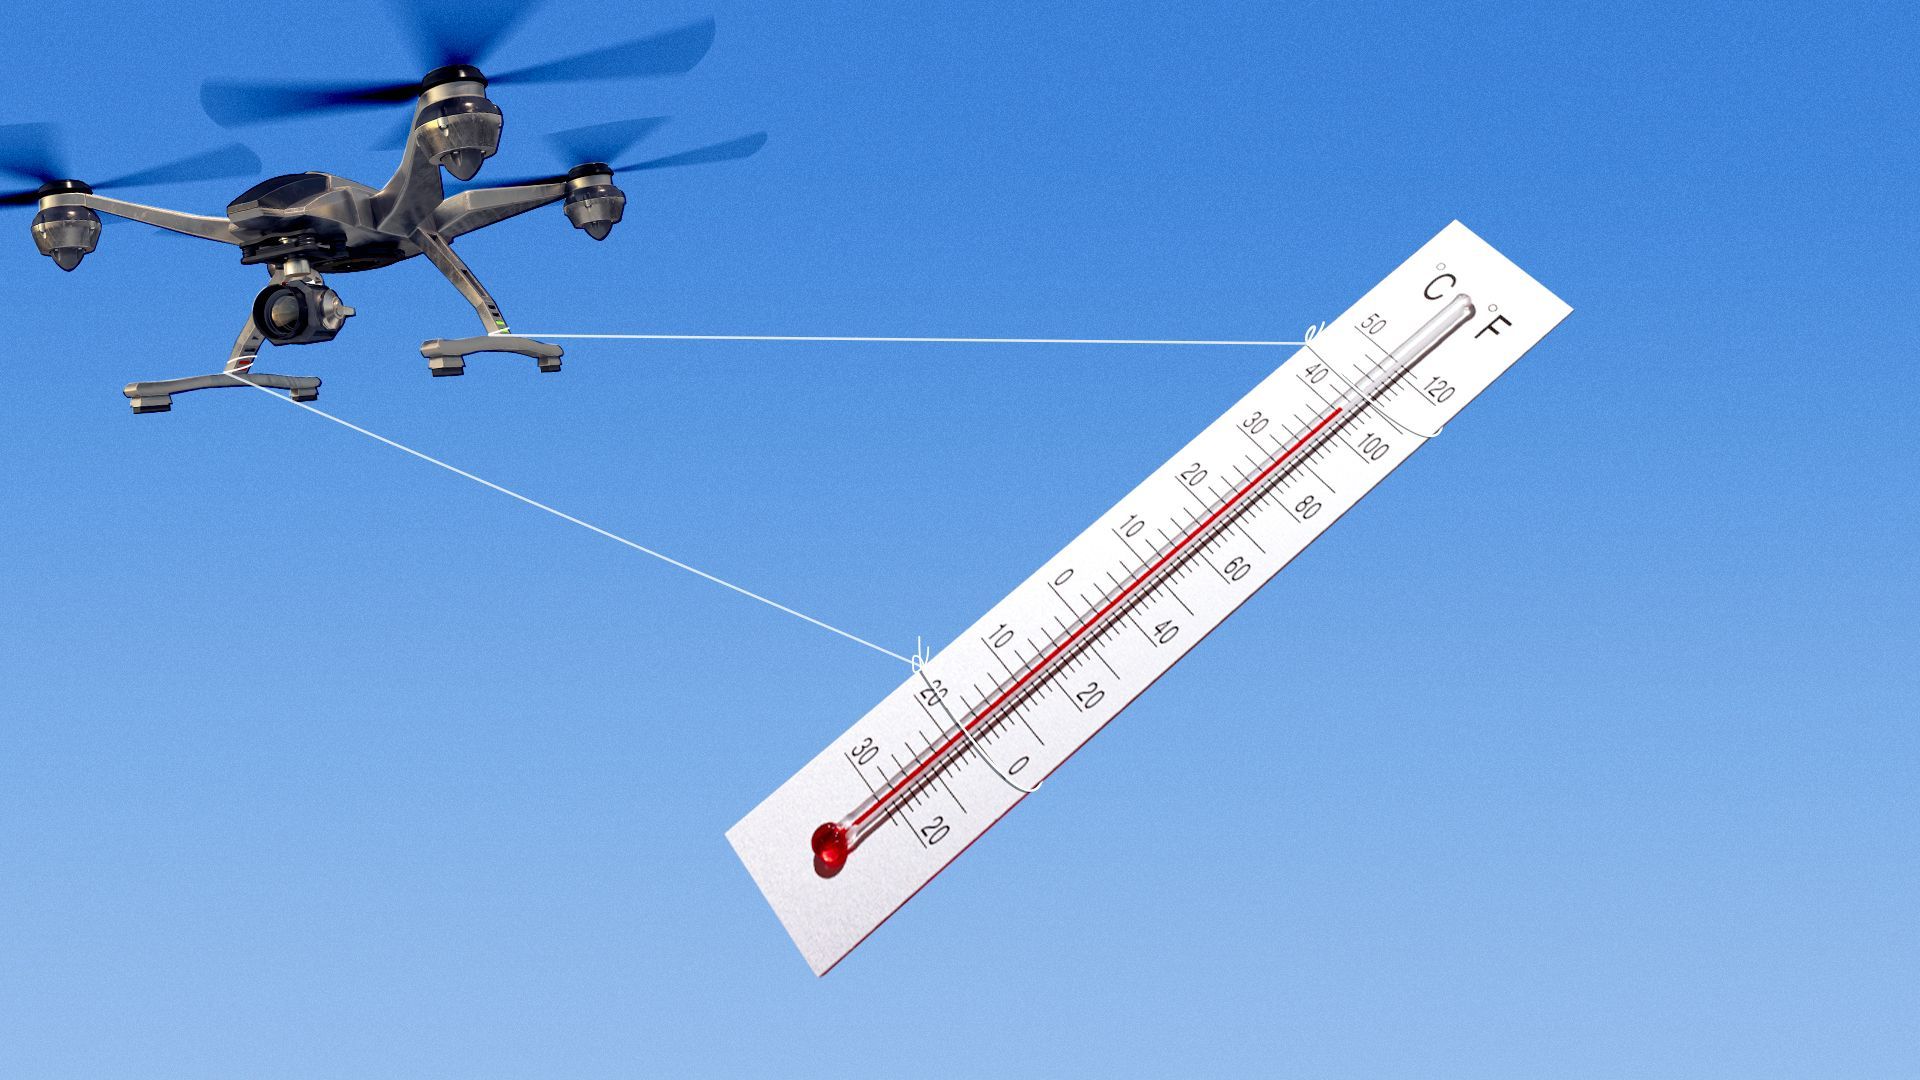 Illustration of a drone hauling a large temperature gauge by string.